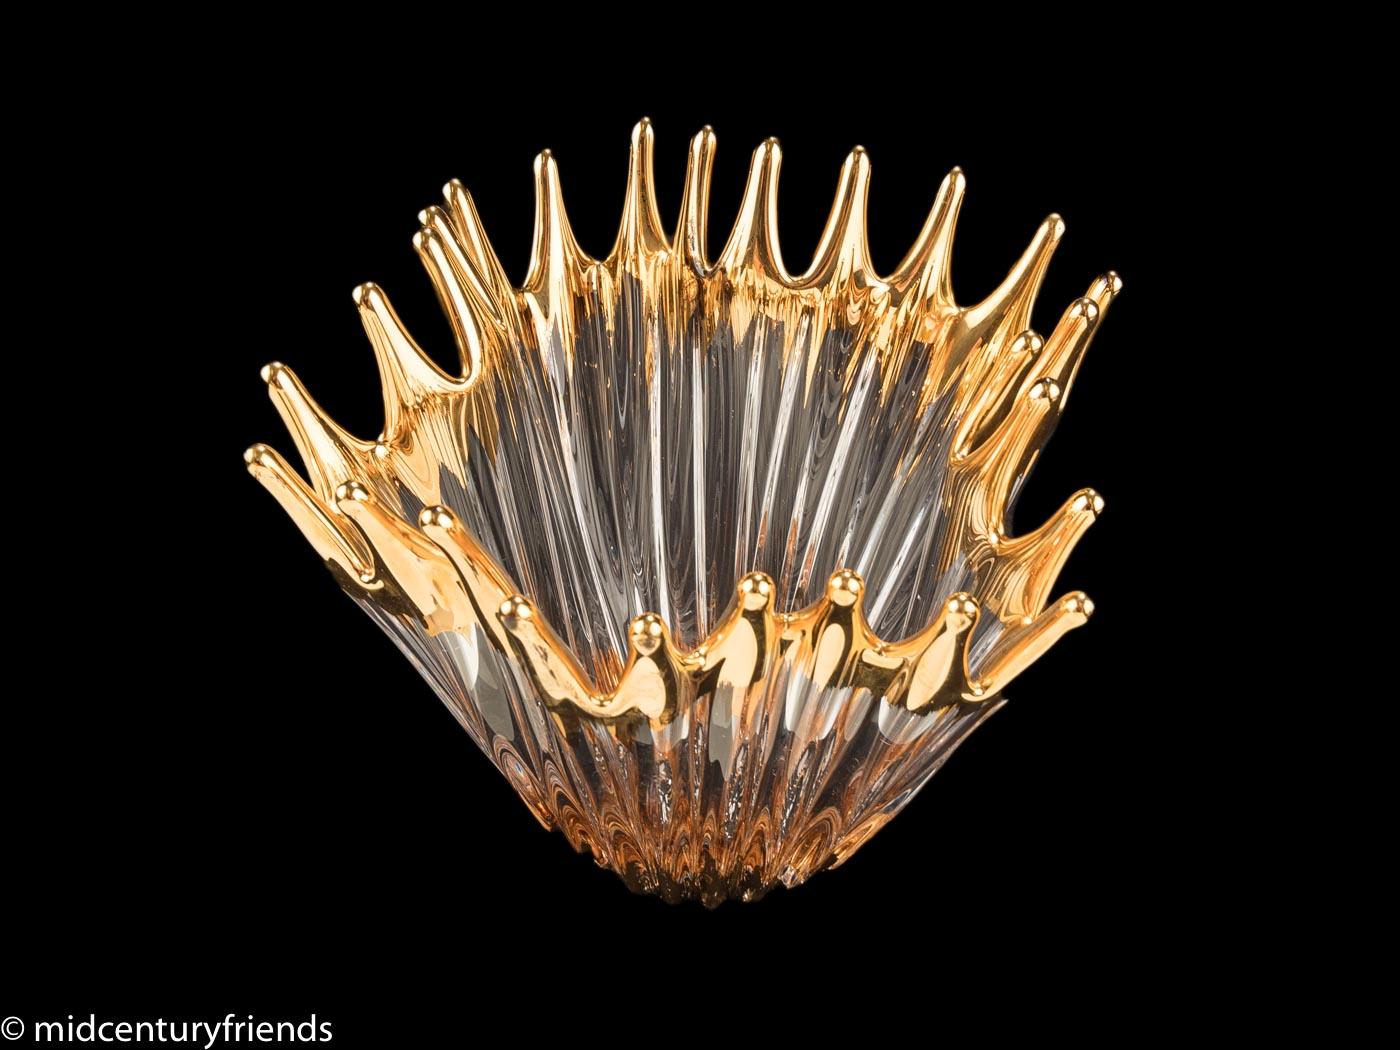 Hand-blown crystal glass bowl with great details in a flowing free form. The stylish bowl in ridge and swirl design is partly gold-plated and partly clear. Handmade, each piece is unique. Manufacturer: CoFrac Art Verrier France, unmarked.

Good